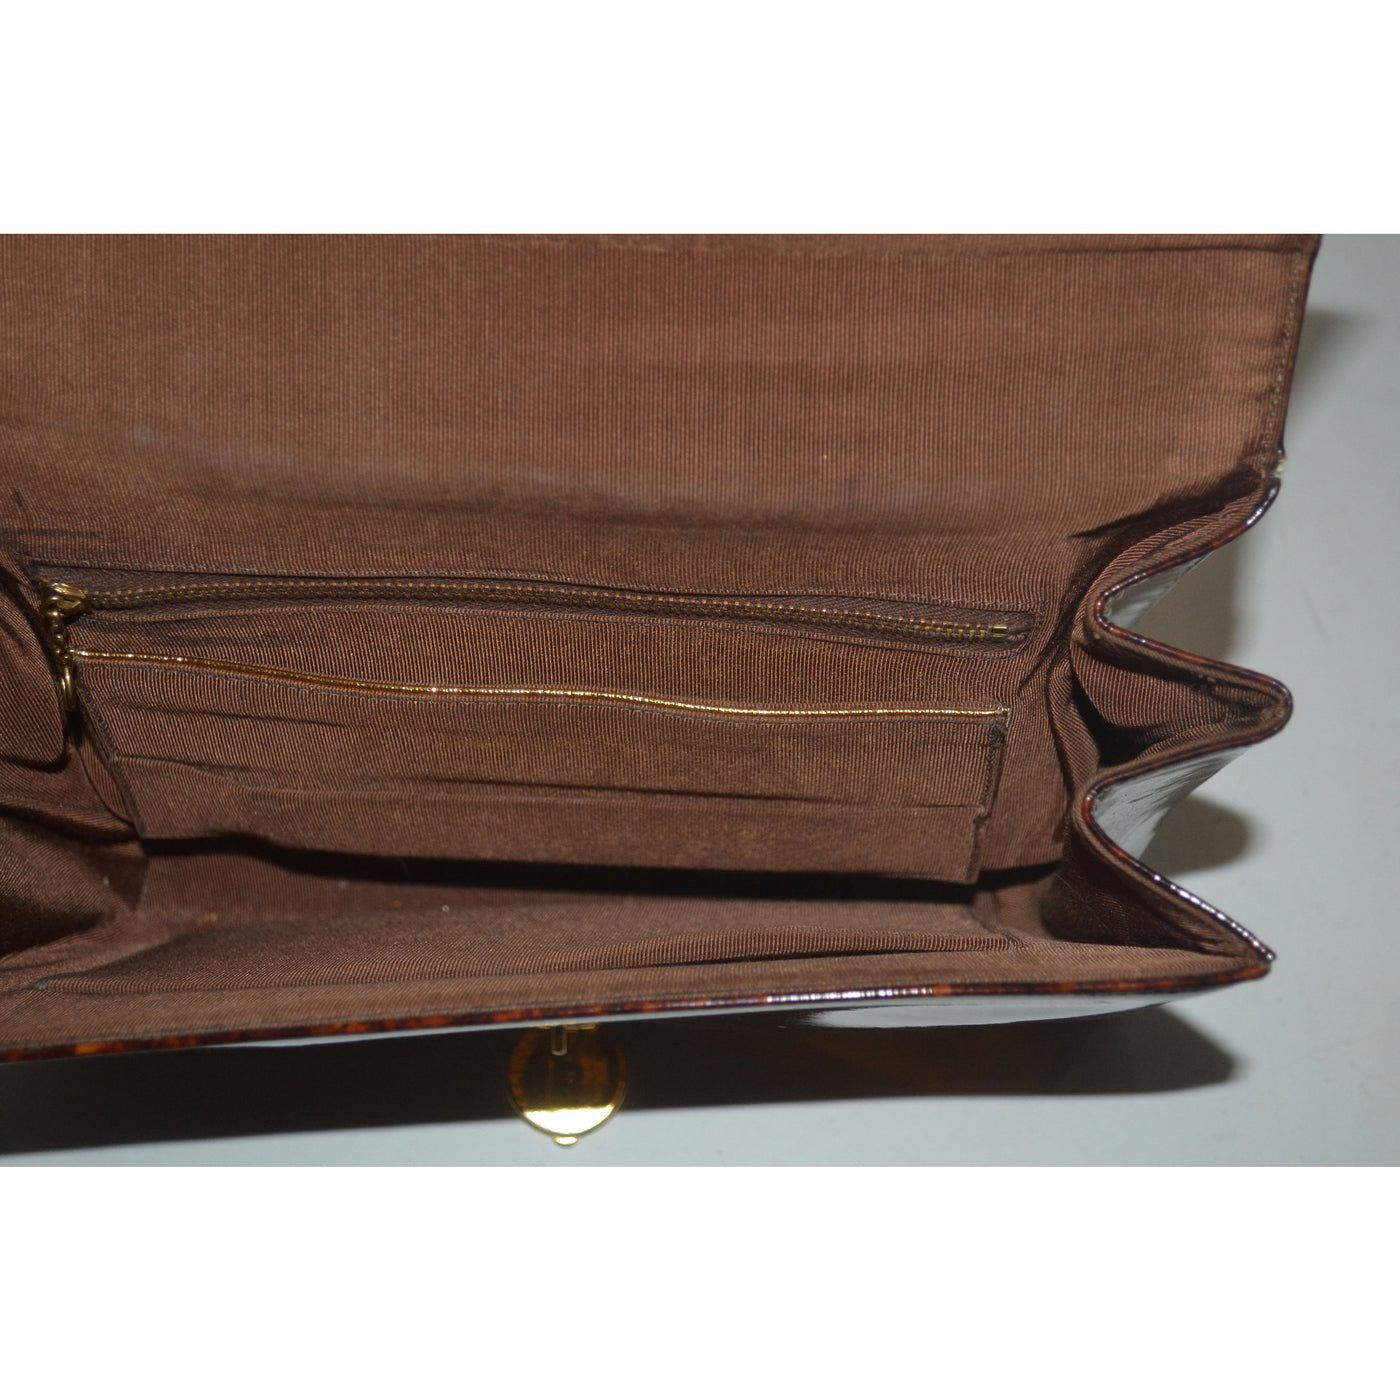 Vintage Brown High Gloss Purse By Saks Fifth Avenue